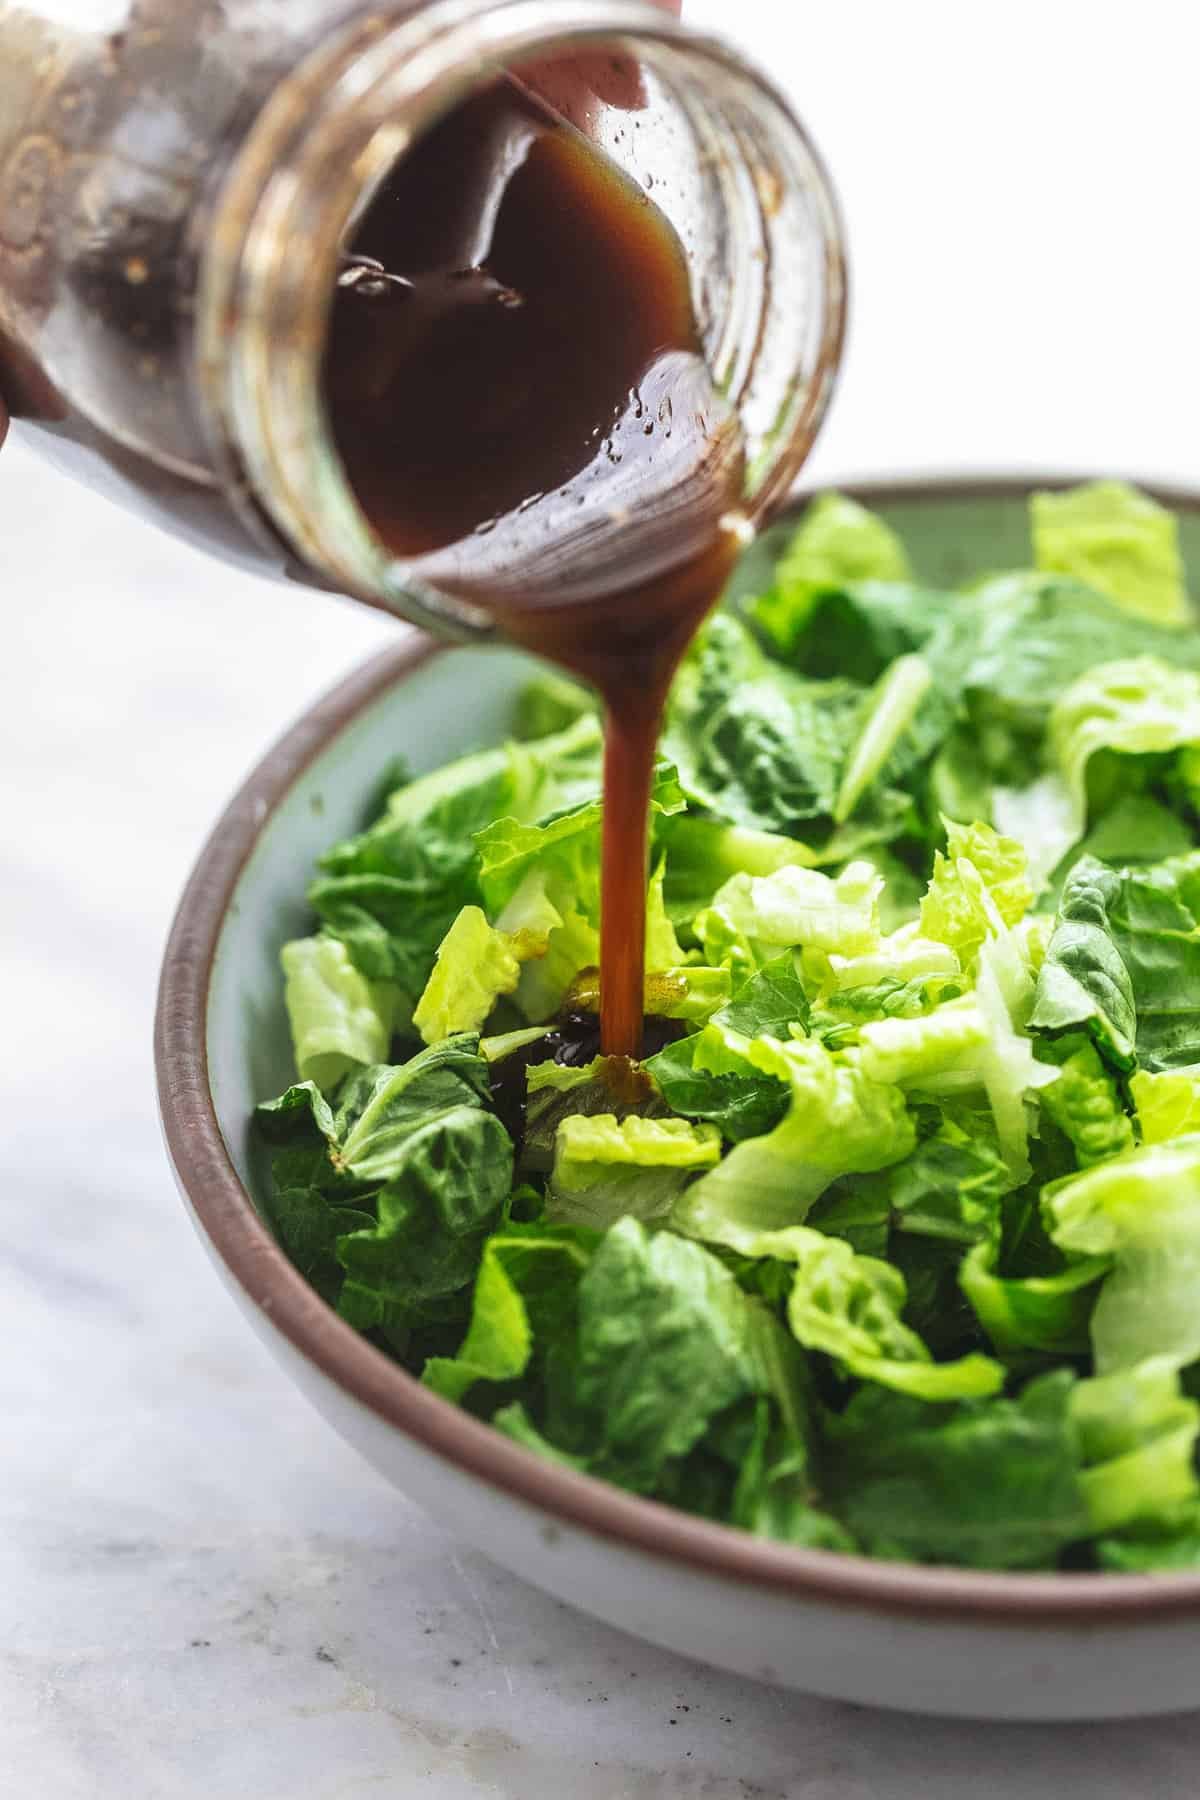 balsamic vinaigrette salad dressing being poured from a jar onto salad in a bowl.